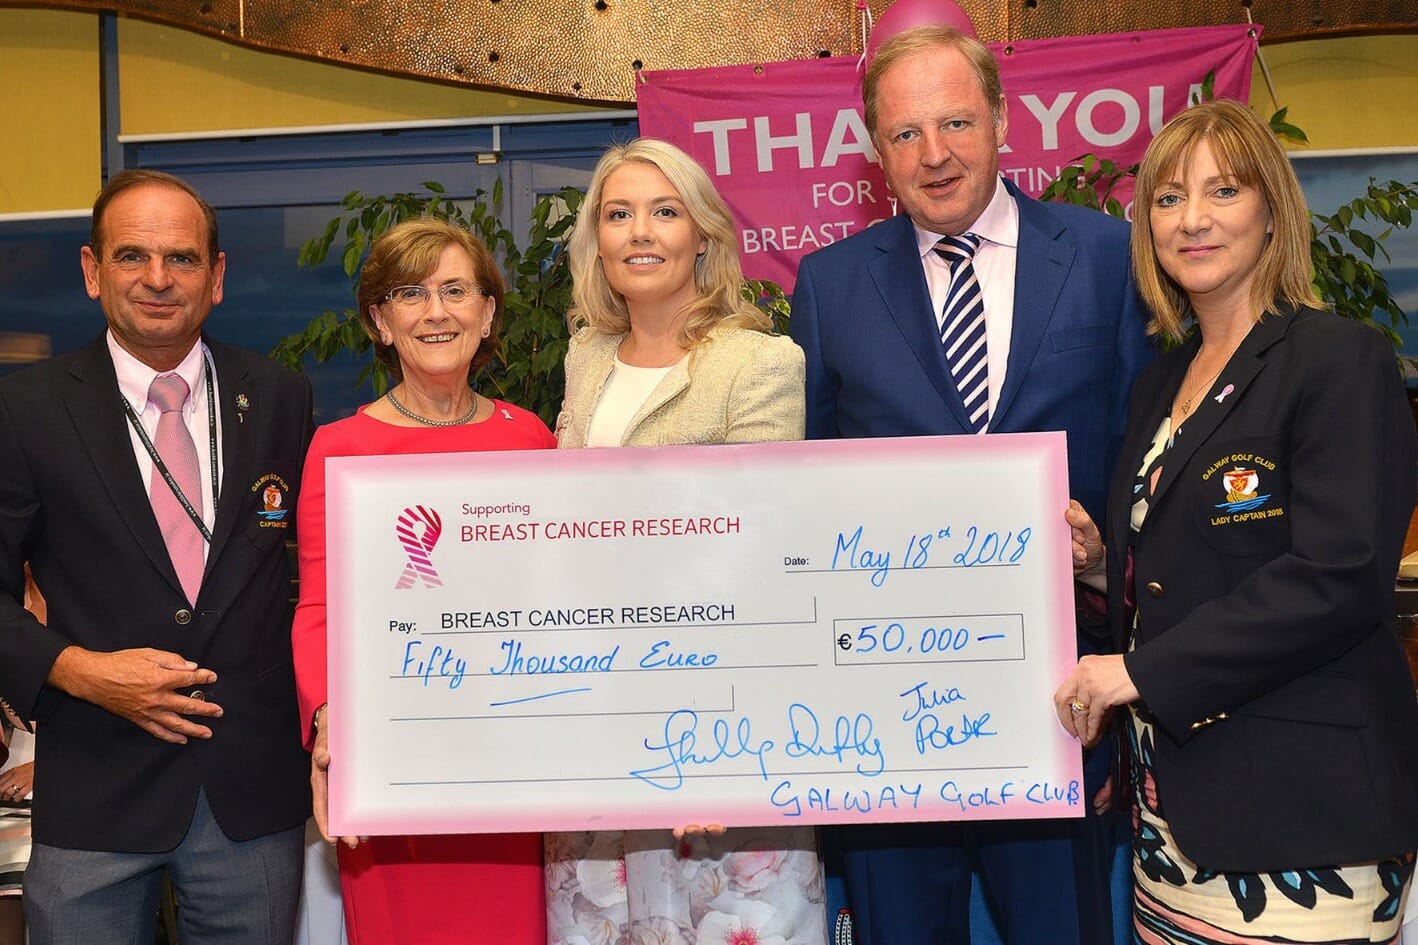 Captains charity day raises €50k for Breast Cancer Research